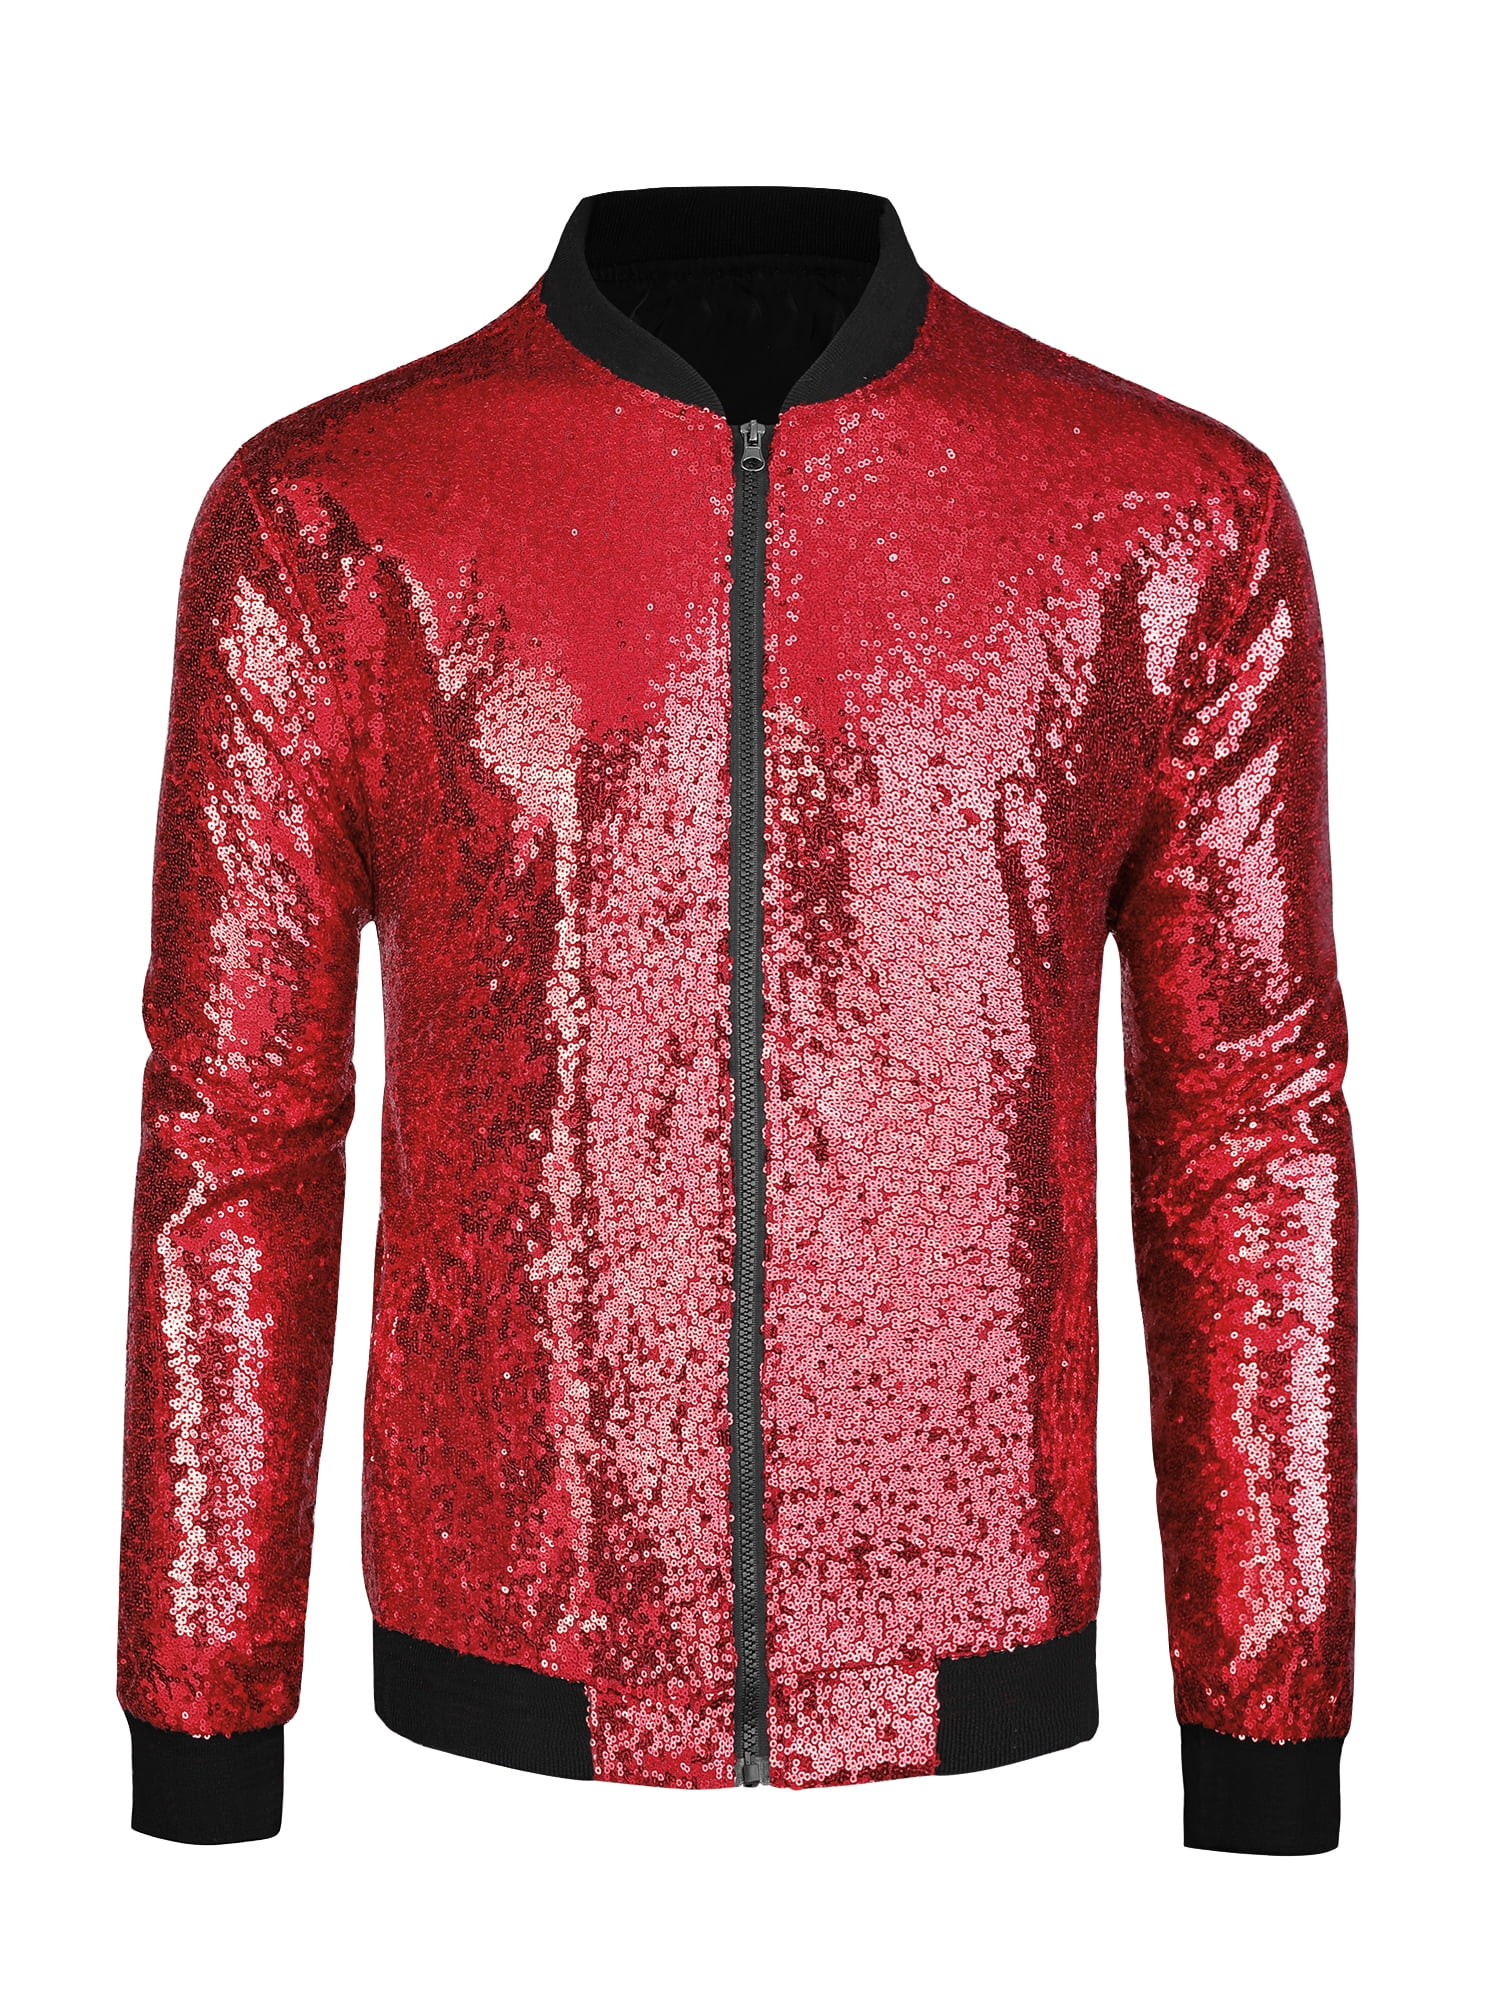 Astros sequined bomber jacket is flying off the shelves at $125 a pop